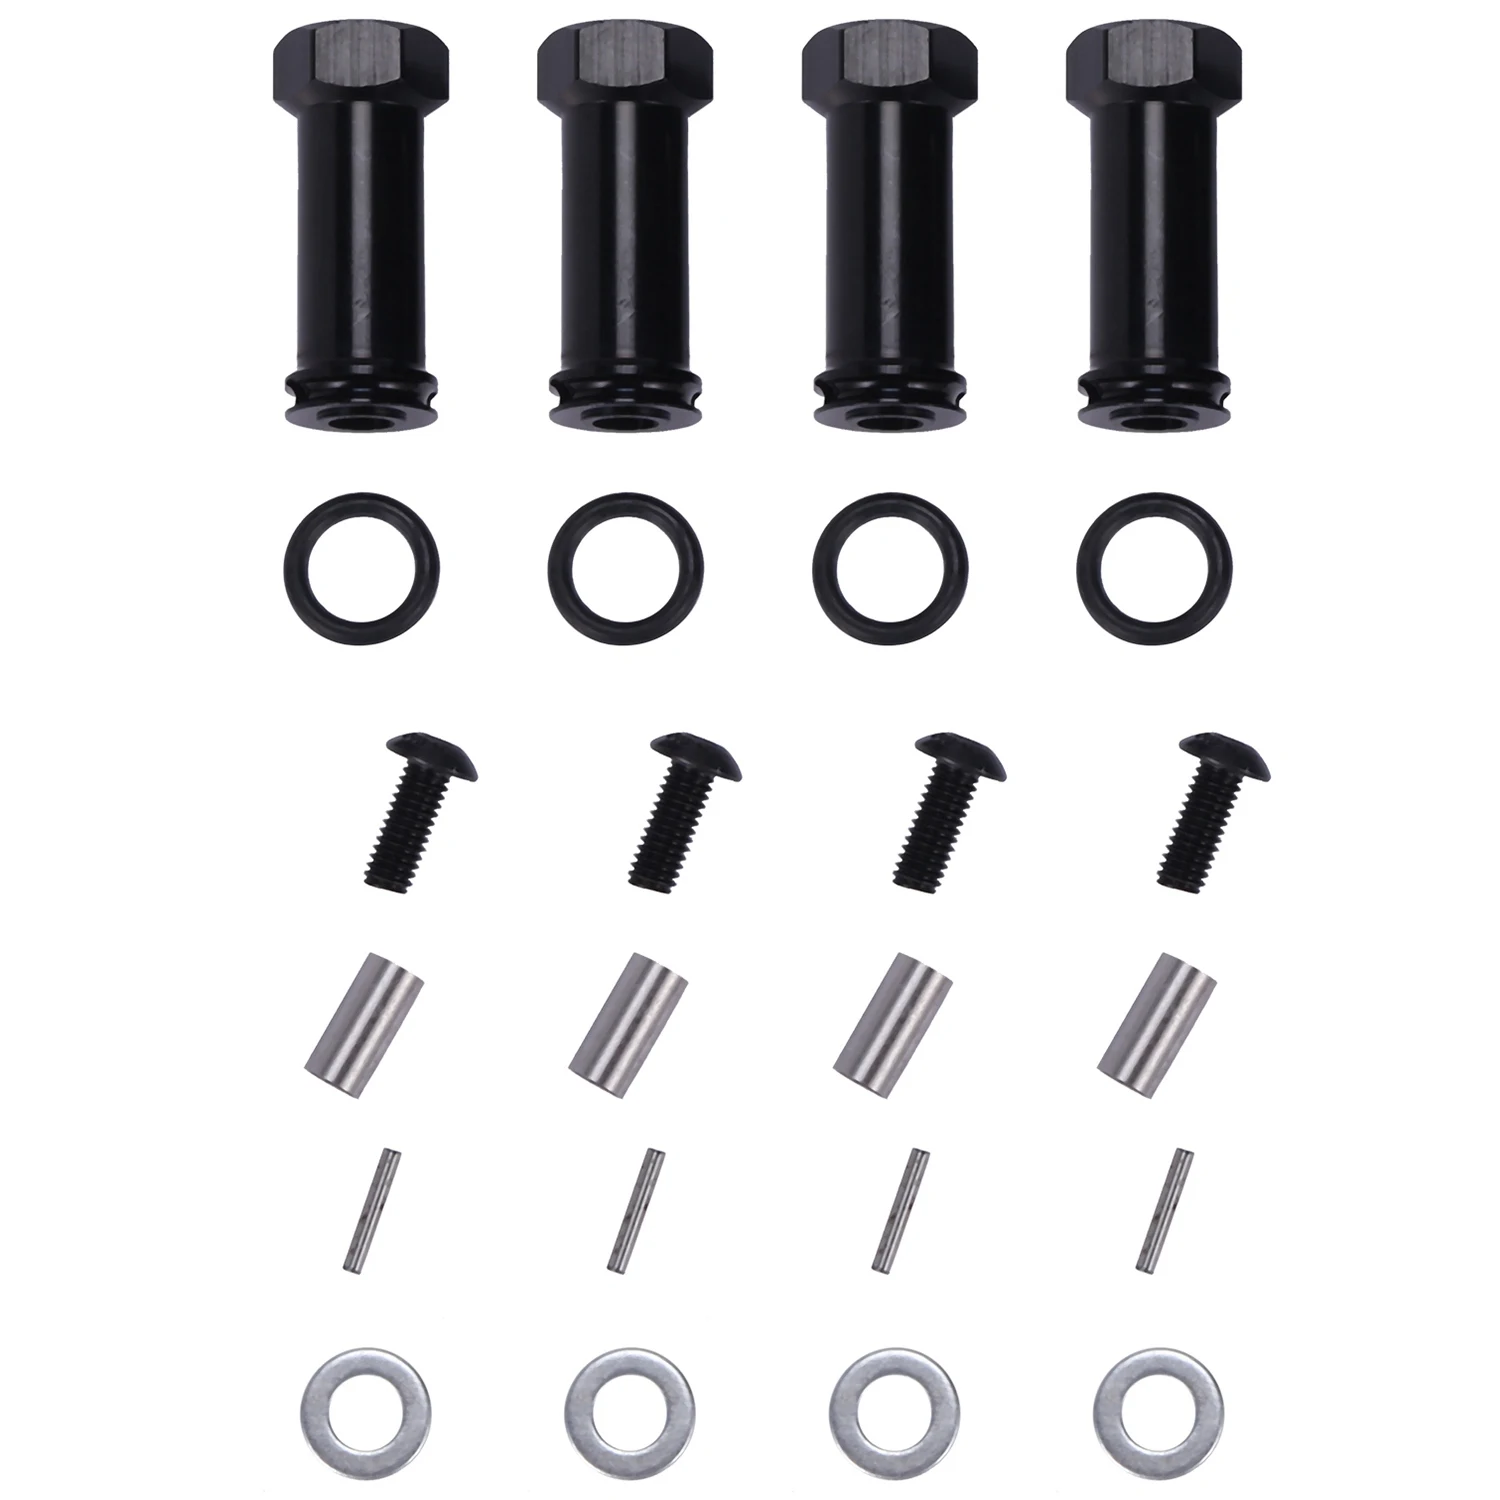 

12Mm Aluminum Wheel Hex Adapters Long 29Mm Extension RC Car Conversion Parts for 1/12 Wltoys 12428 12423 Black